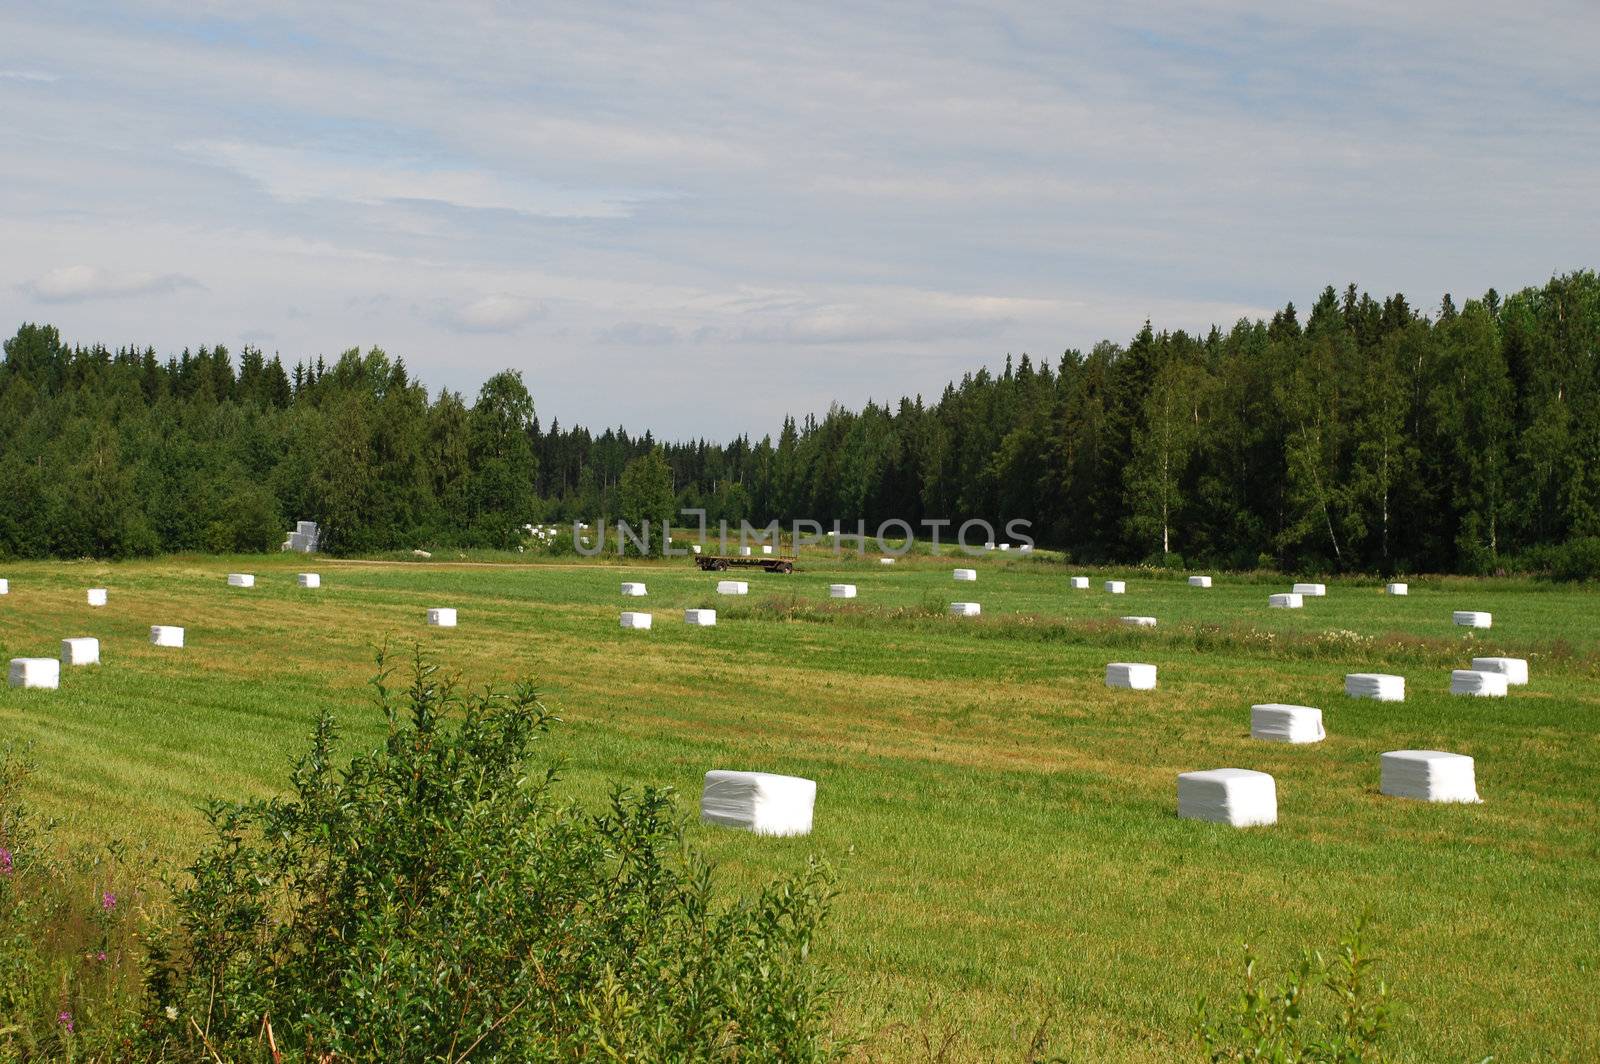 Meadows of Eastern Finland, Northern Savonia region, , dried hay pached in wite plastic film are over the field, the mowing is surrounded by the forest

